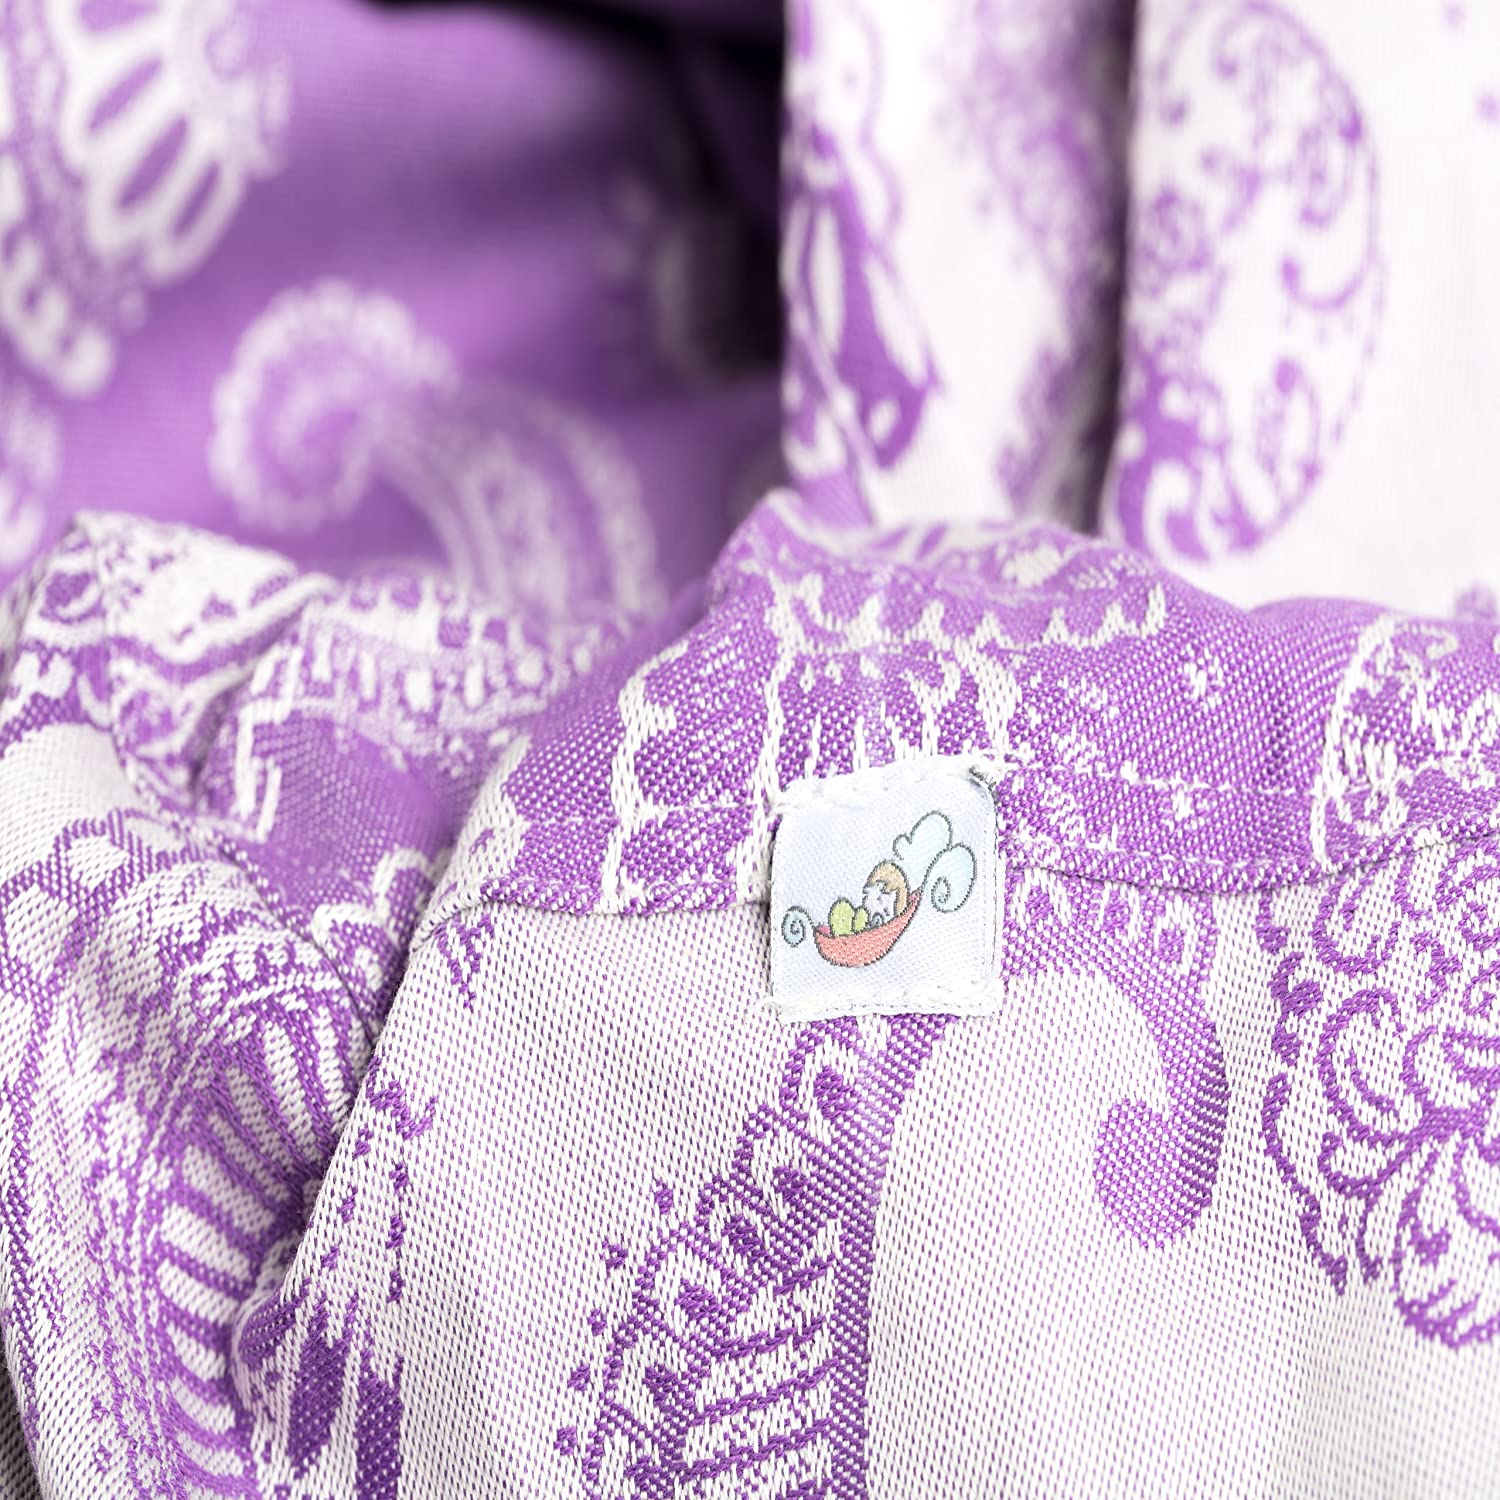 SCHMUSEWOLKE Baby Carrier Sling Jacquard Caribbean Violet Organic Cotton 70 x 470 cm Baby Size Toddler Size Newborns and Toddlers 0-60 Months 3-16 kg Belly and Back Carrying Cloth